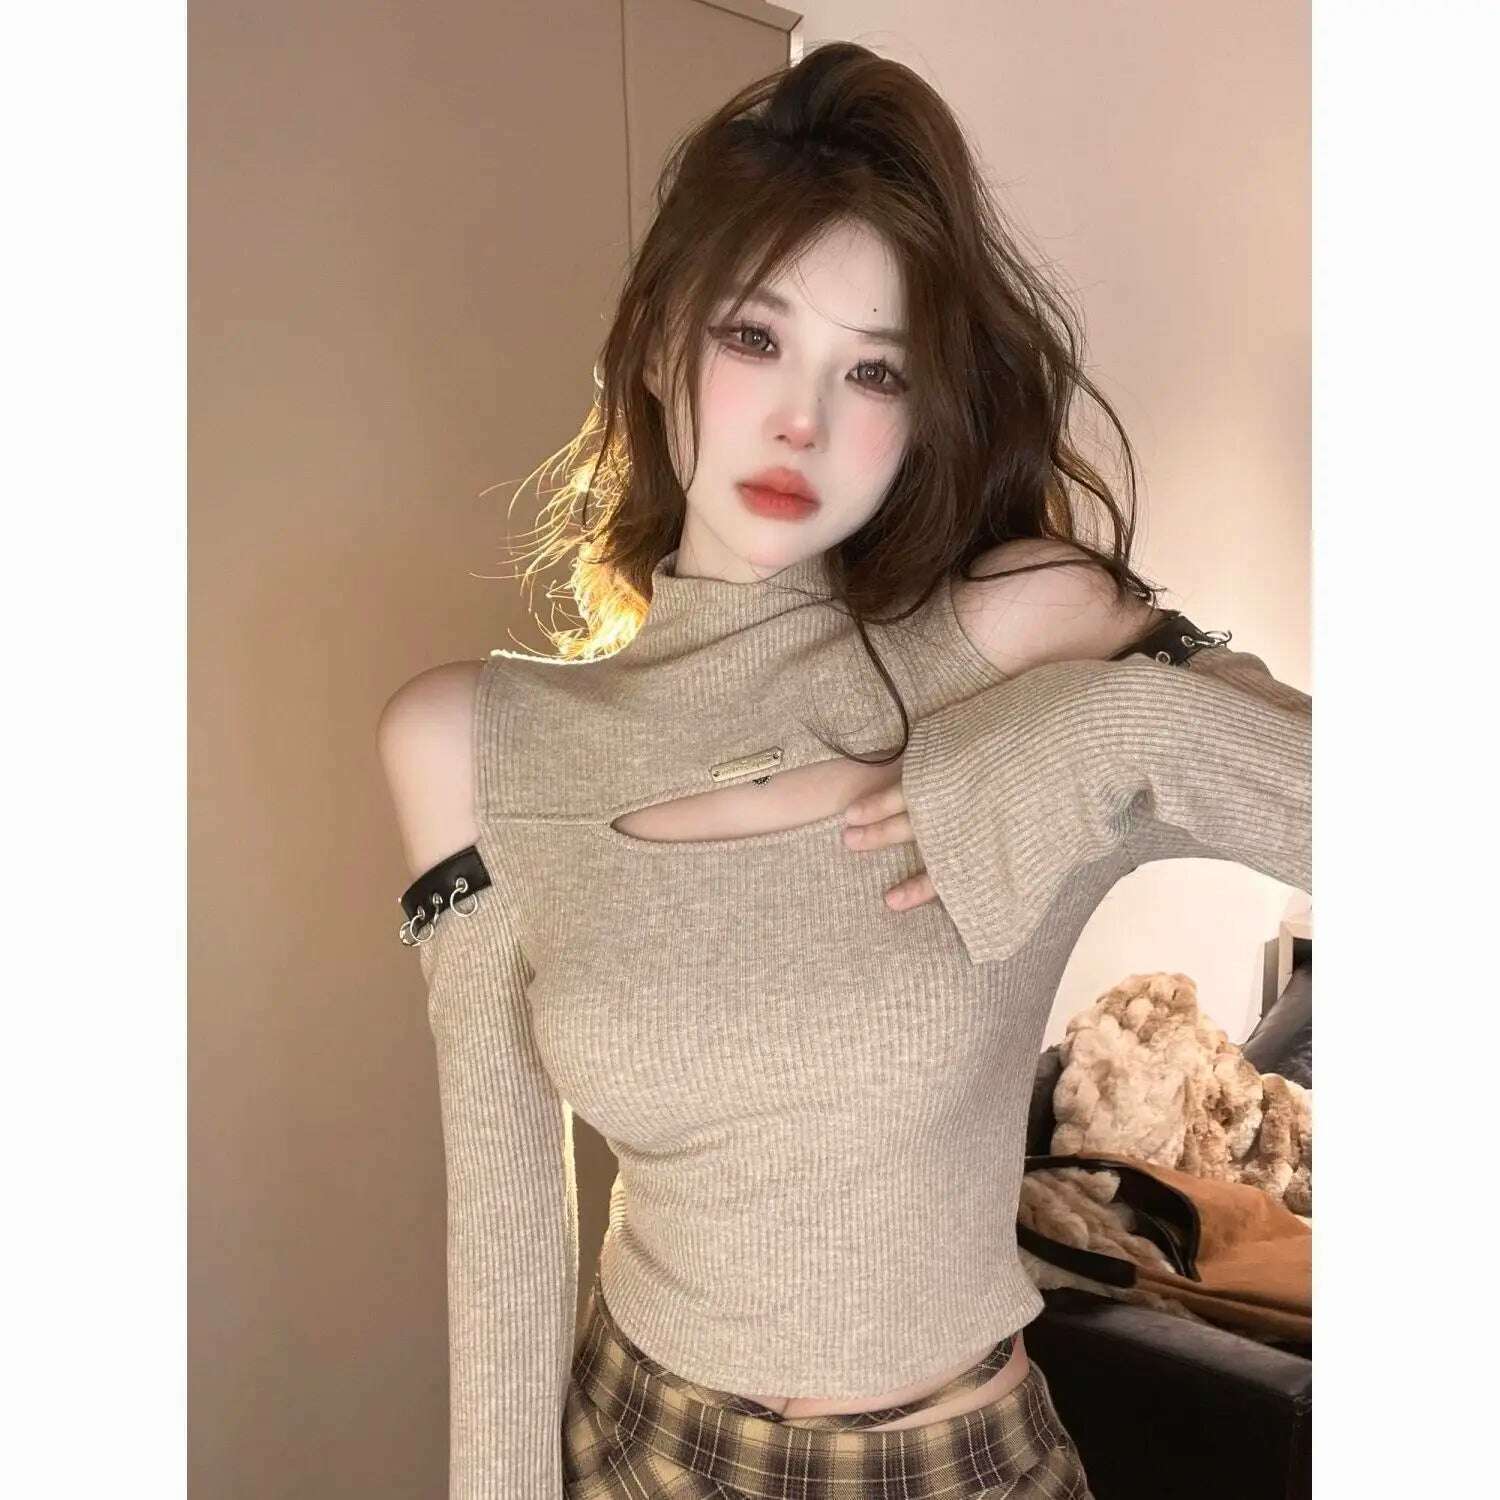 KIMLUD, Long Sleeve T-shirts Women Hollow Out Spliced Slim-fit Sexy Autumn Turtleneck All-match Off Shoulder Hot Girls Streetwear Soft, khaki / S, KIMLUD Womens Clothes